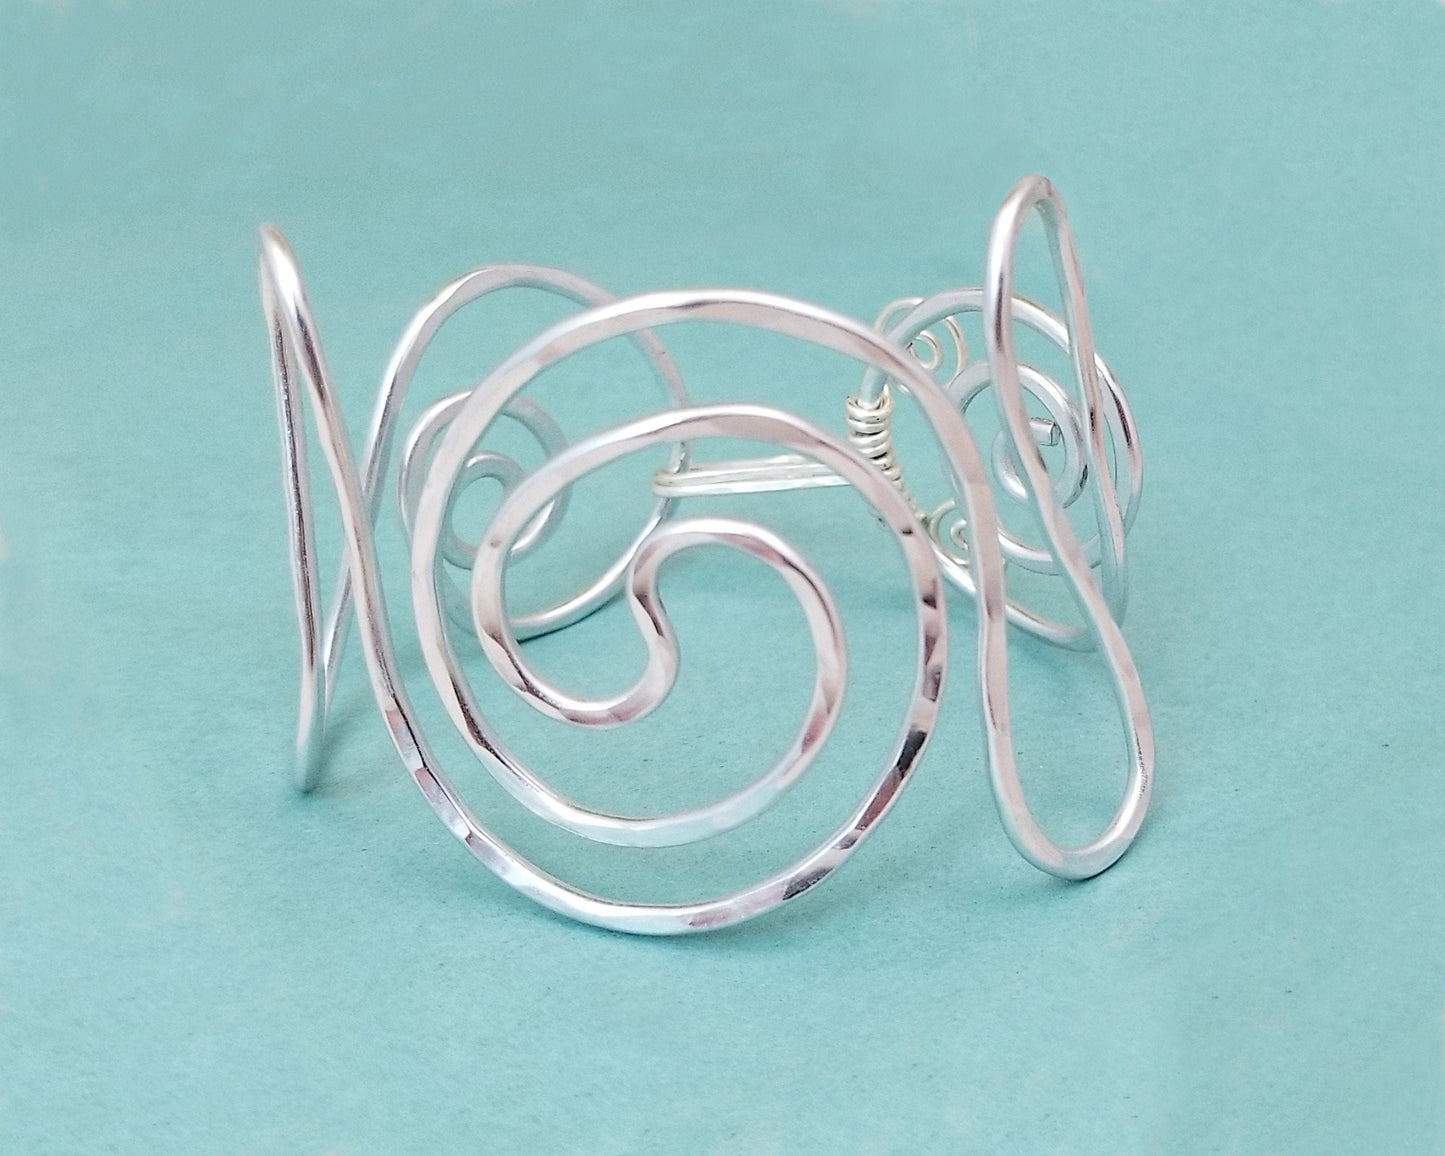 Minimalist Statement Cuff, Central Spiral Design, Hammered Wire, Adjustable, Lightweight, Choice of Colors and Metals